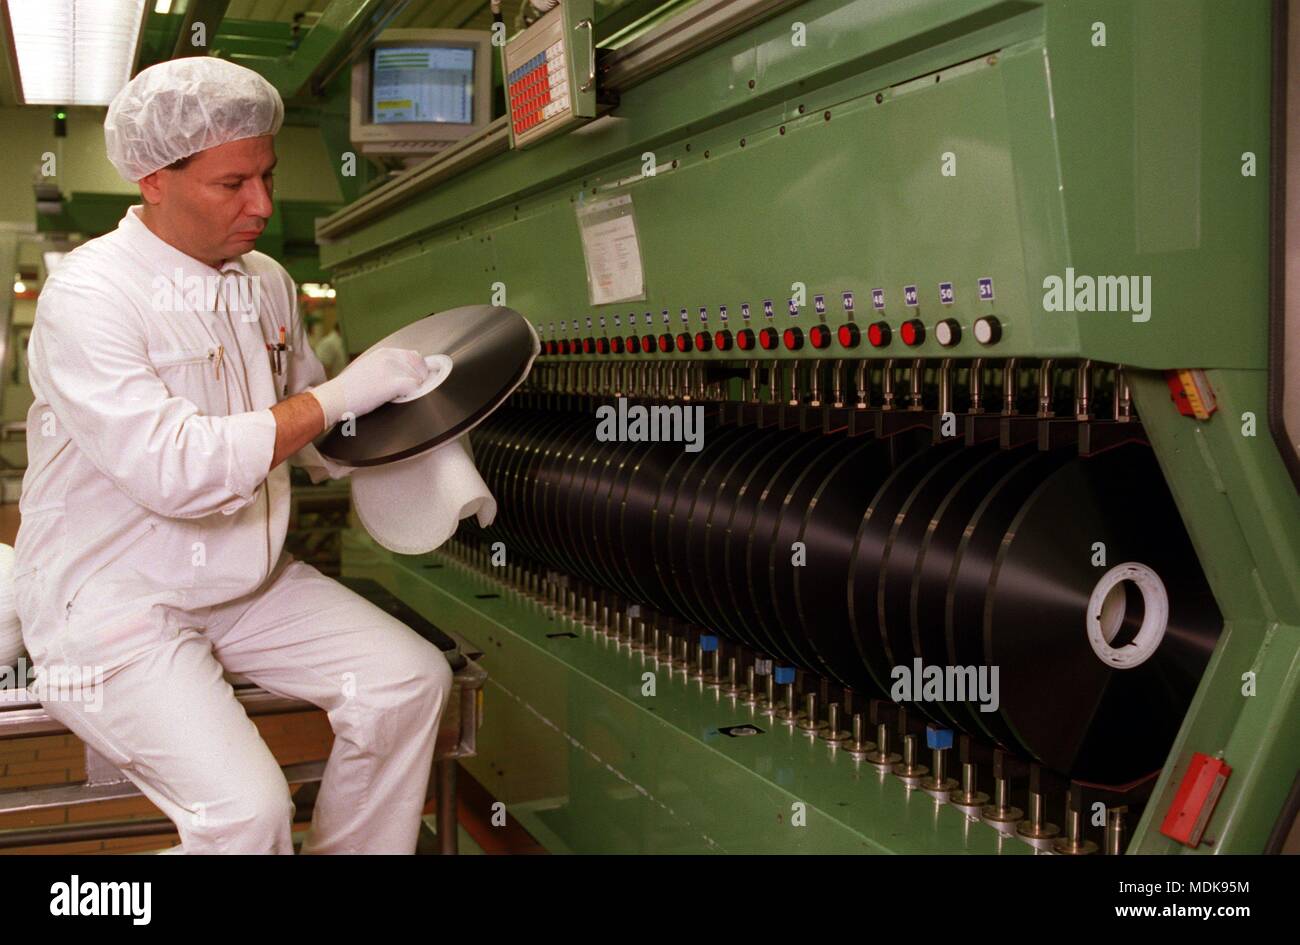 Willstatt/Baden-Wurttemberg, 18.1.96: A worker working on a cutting machine for video magnetic tape at the BASF Magnetics works inspects the winding mirror of a video magnetic tape blank roll. After three years in the loss zone, the manufacturer of audio and video cassettes as well as magnetic tape for the music and computer industry presented for the first time a balanced result in 1994, the group turnover was 1.6 billion marks. The company sells around 270 million audio and video cassettes per year, making dawith one of the world's leading manufacturers in this field. | usage worldwide Stock Photo